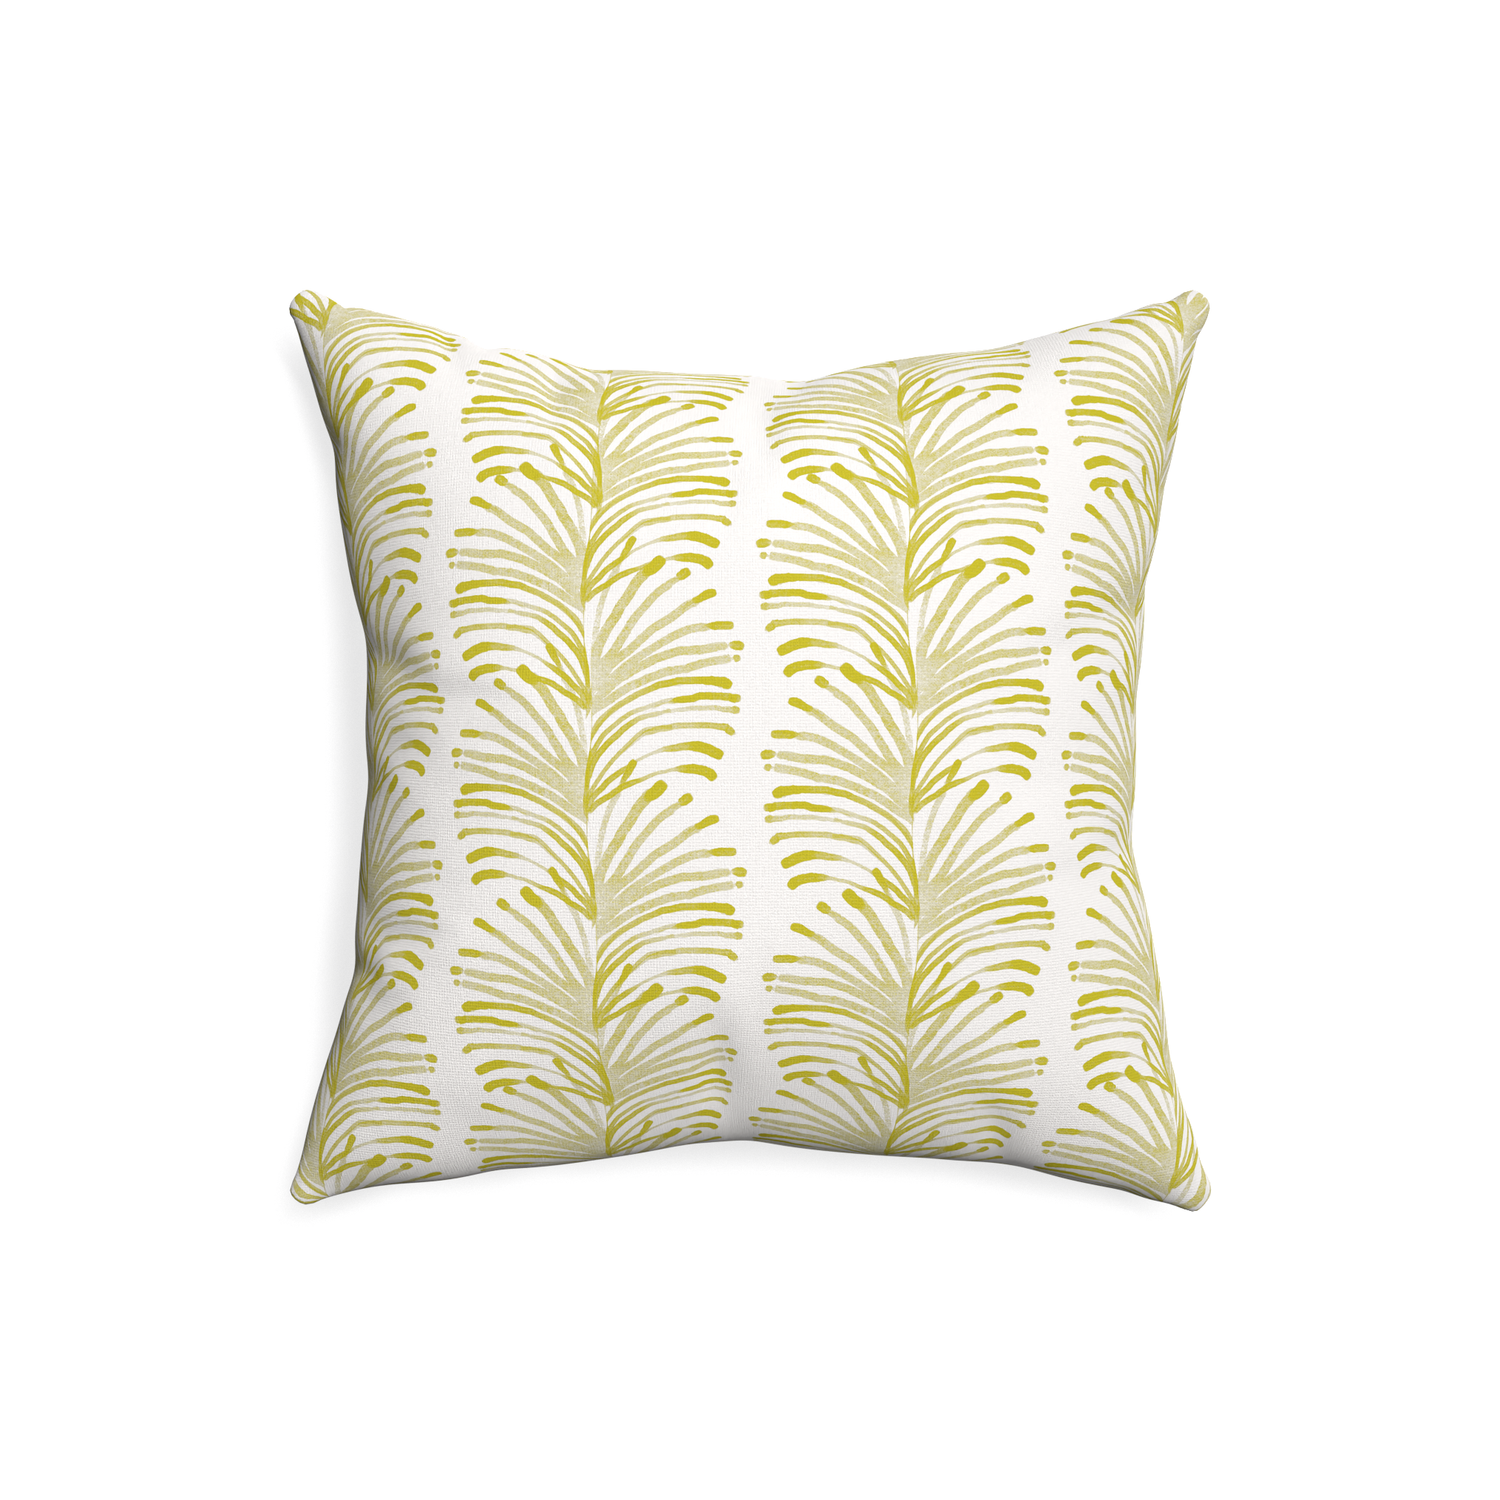 20-square emma chartreuse custom yellow stripe chartreusepillow with none on white background